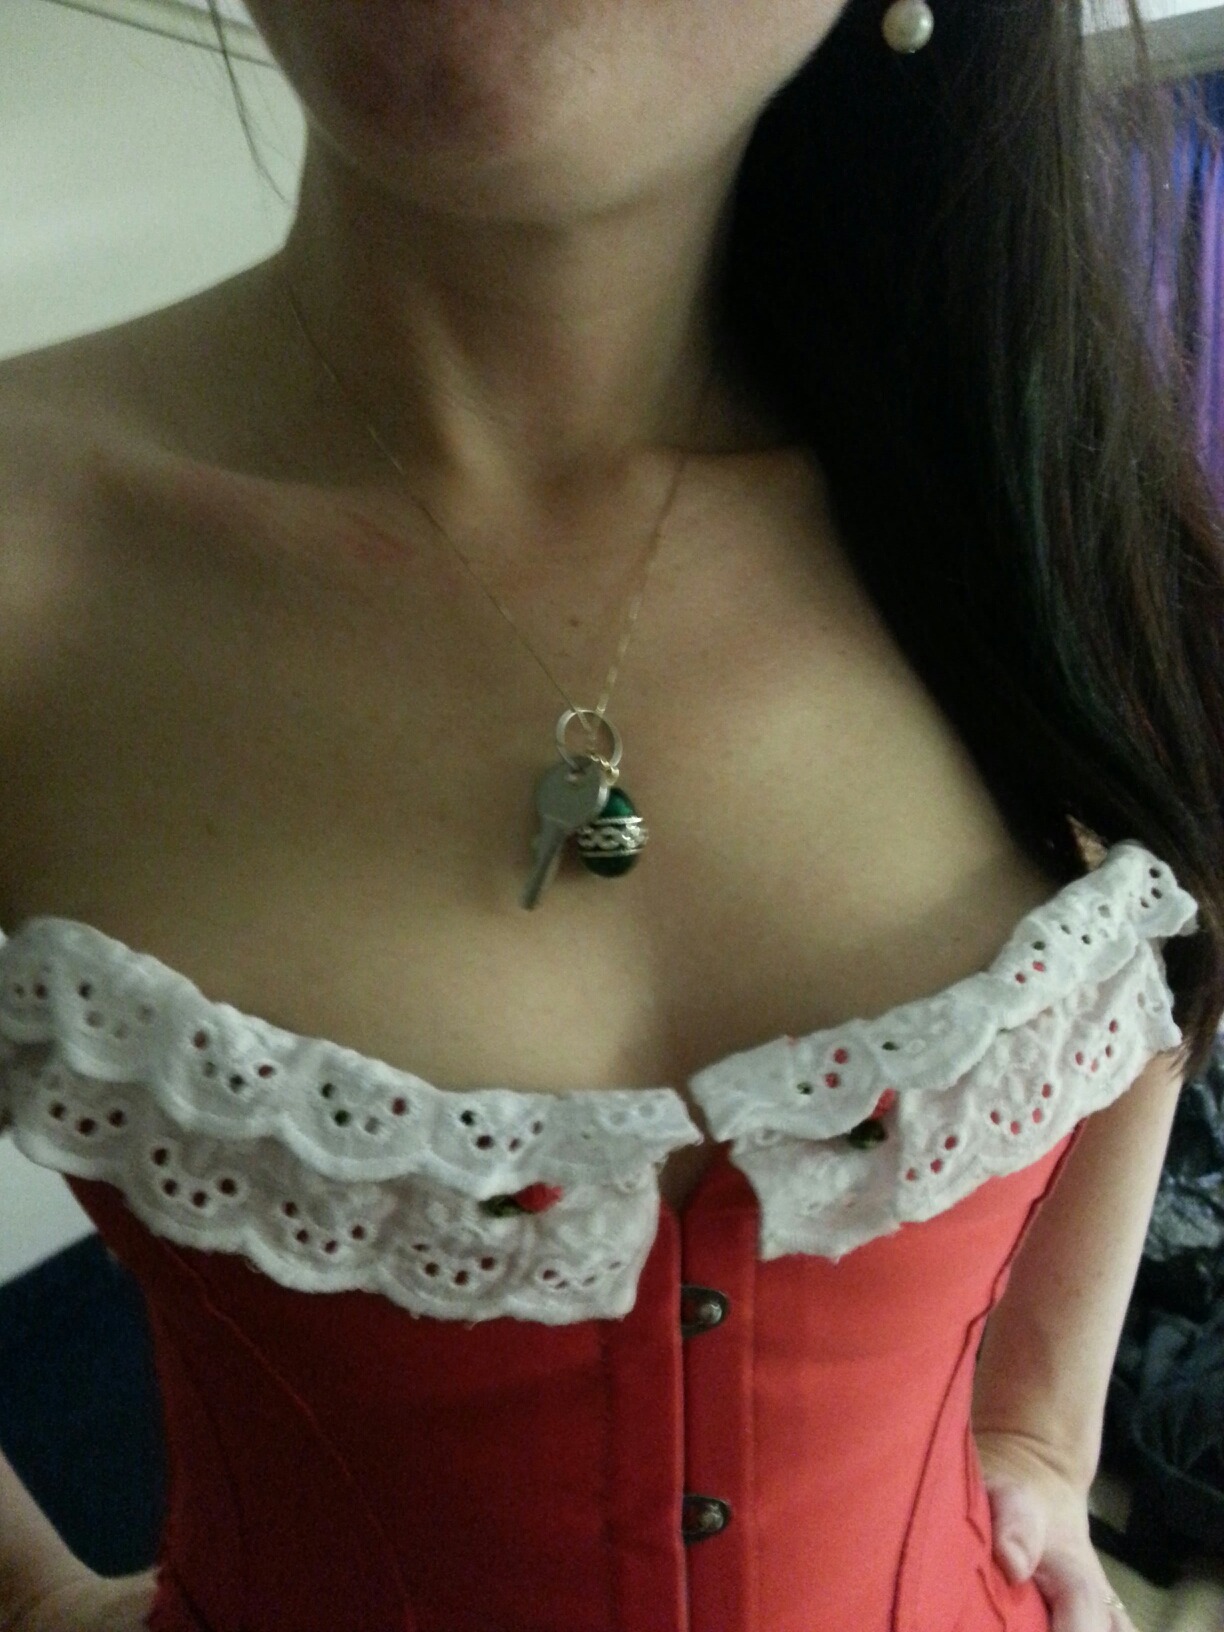 intrigueny:  My Sun &amp; Stars, Krissy, wearing the key to my CB6000 male chastity